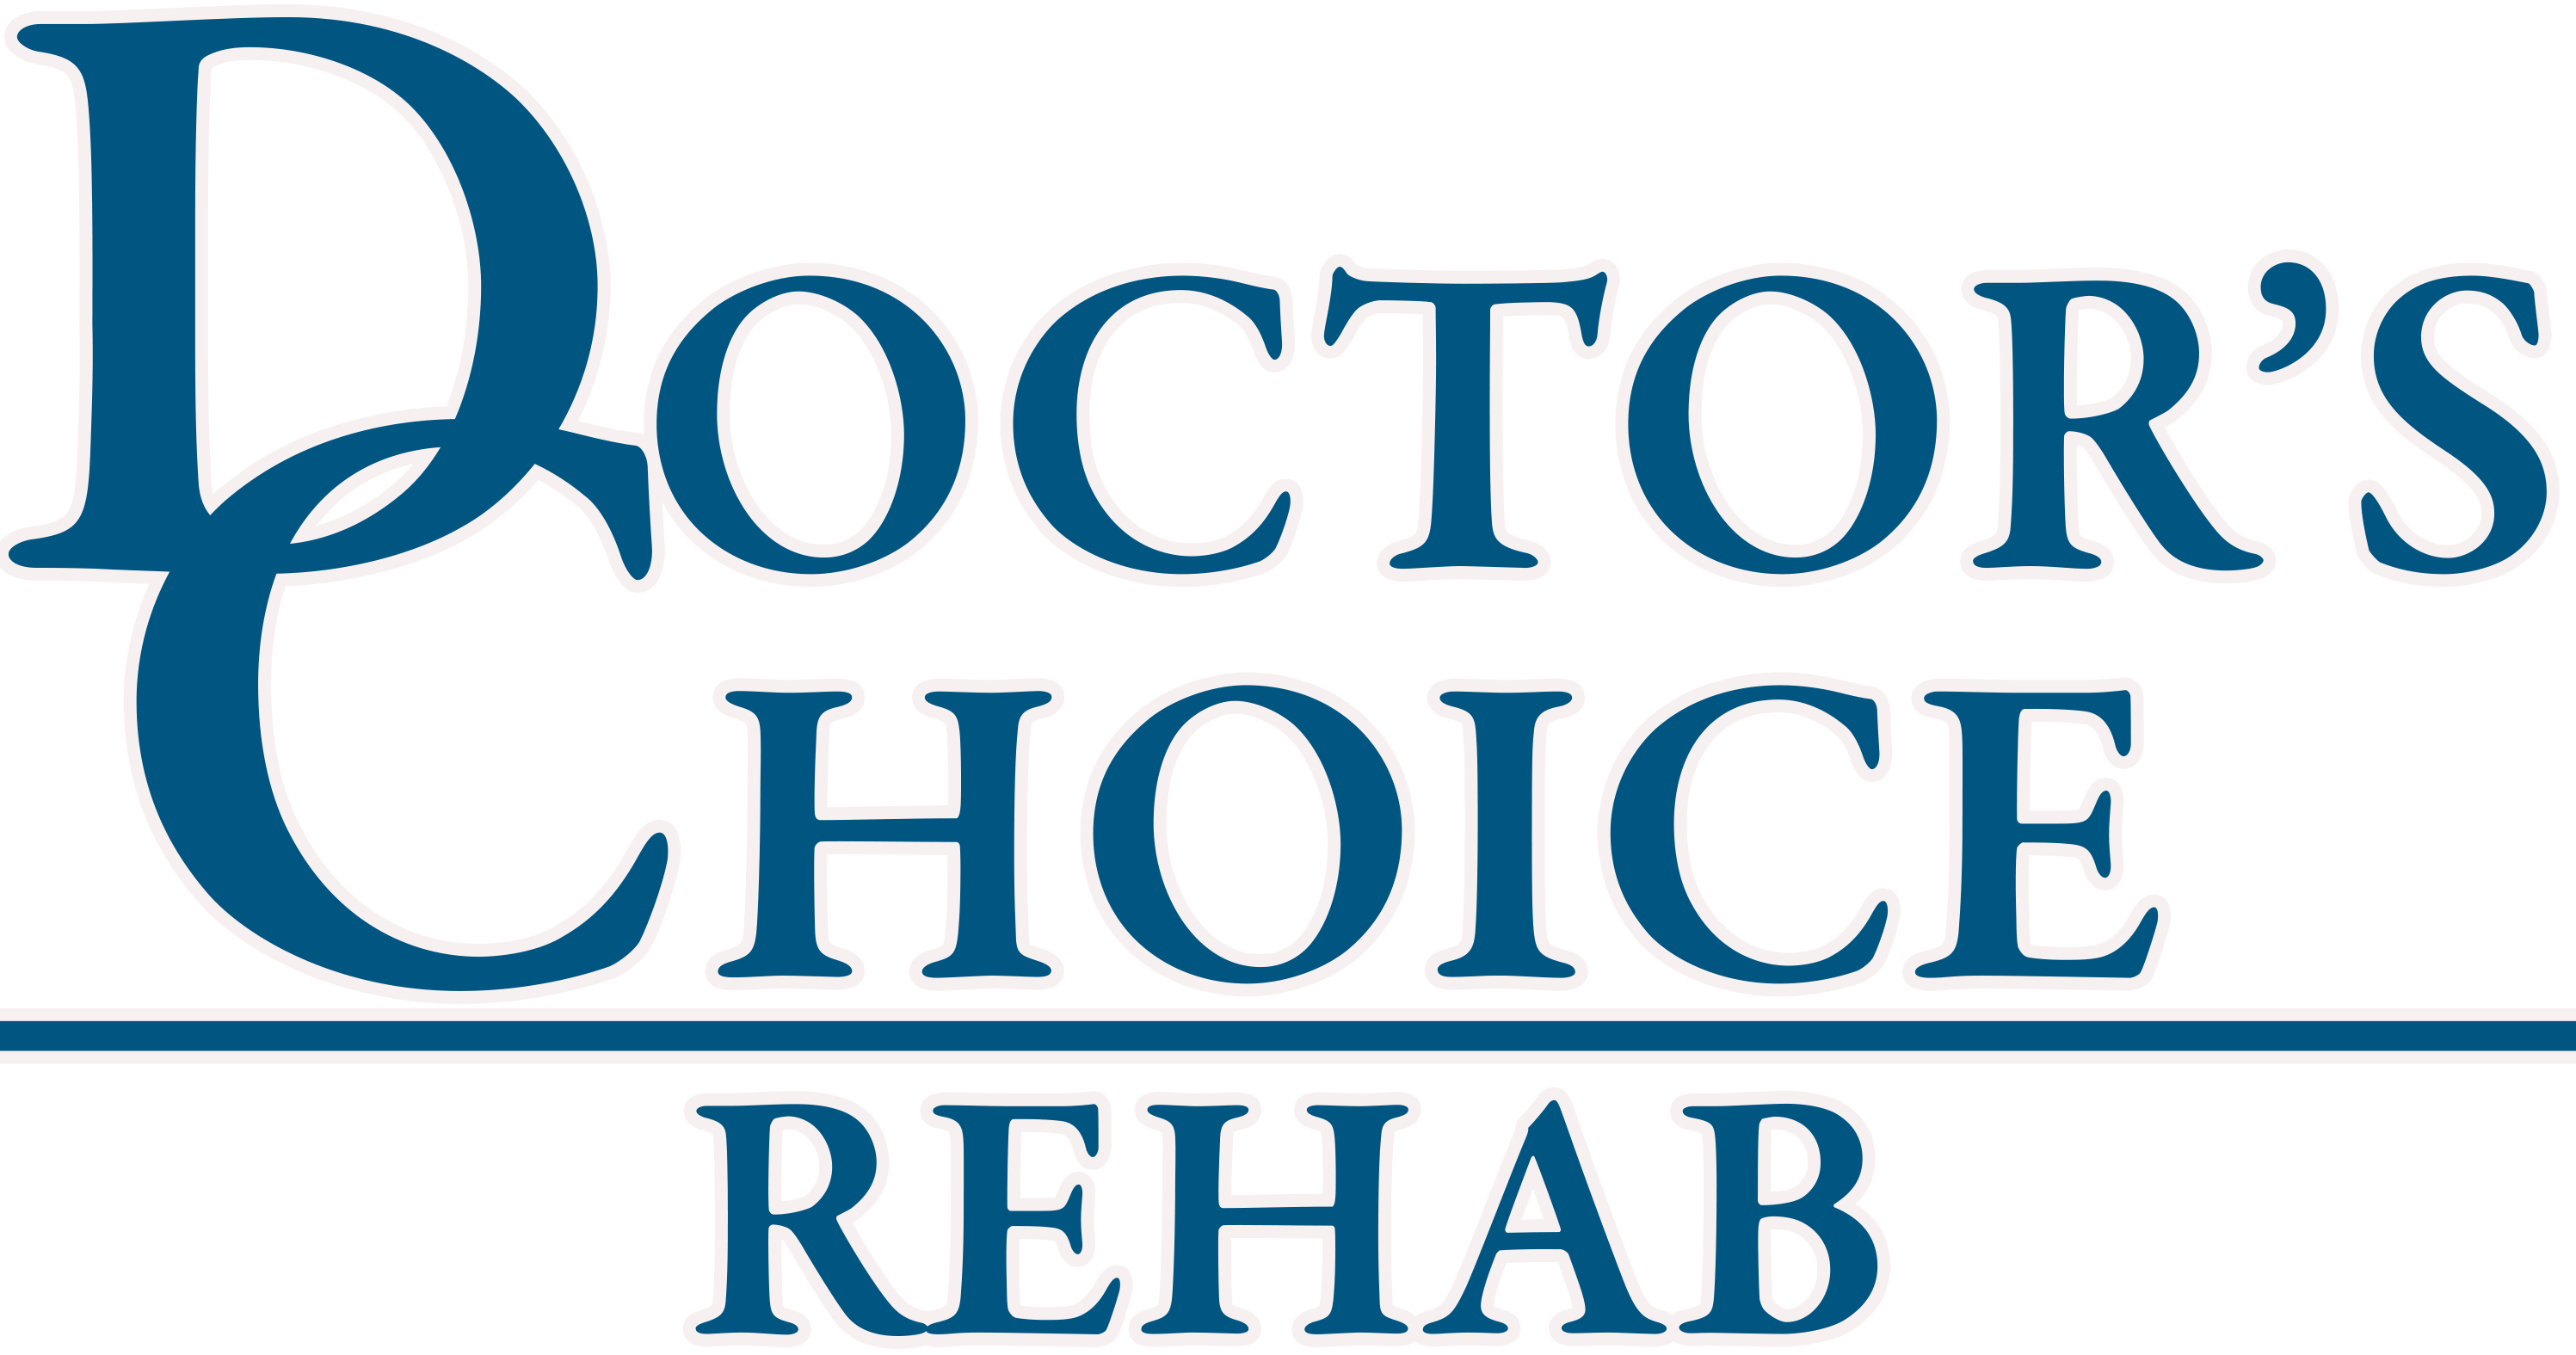  – Welcome to Doctor's Choice Rehab- Chiropractic treatment McAllen, Treat you lower back pain, neck pain, motor vehicle accidents and more.